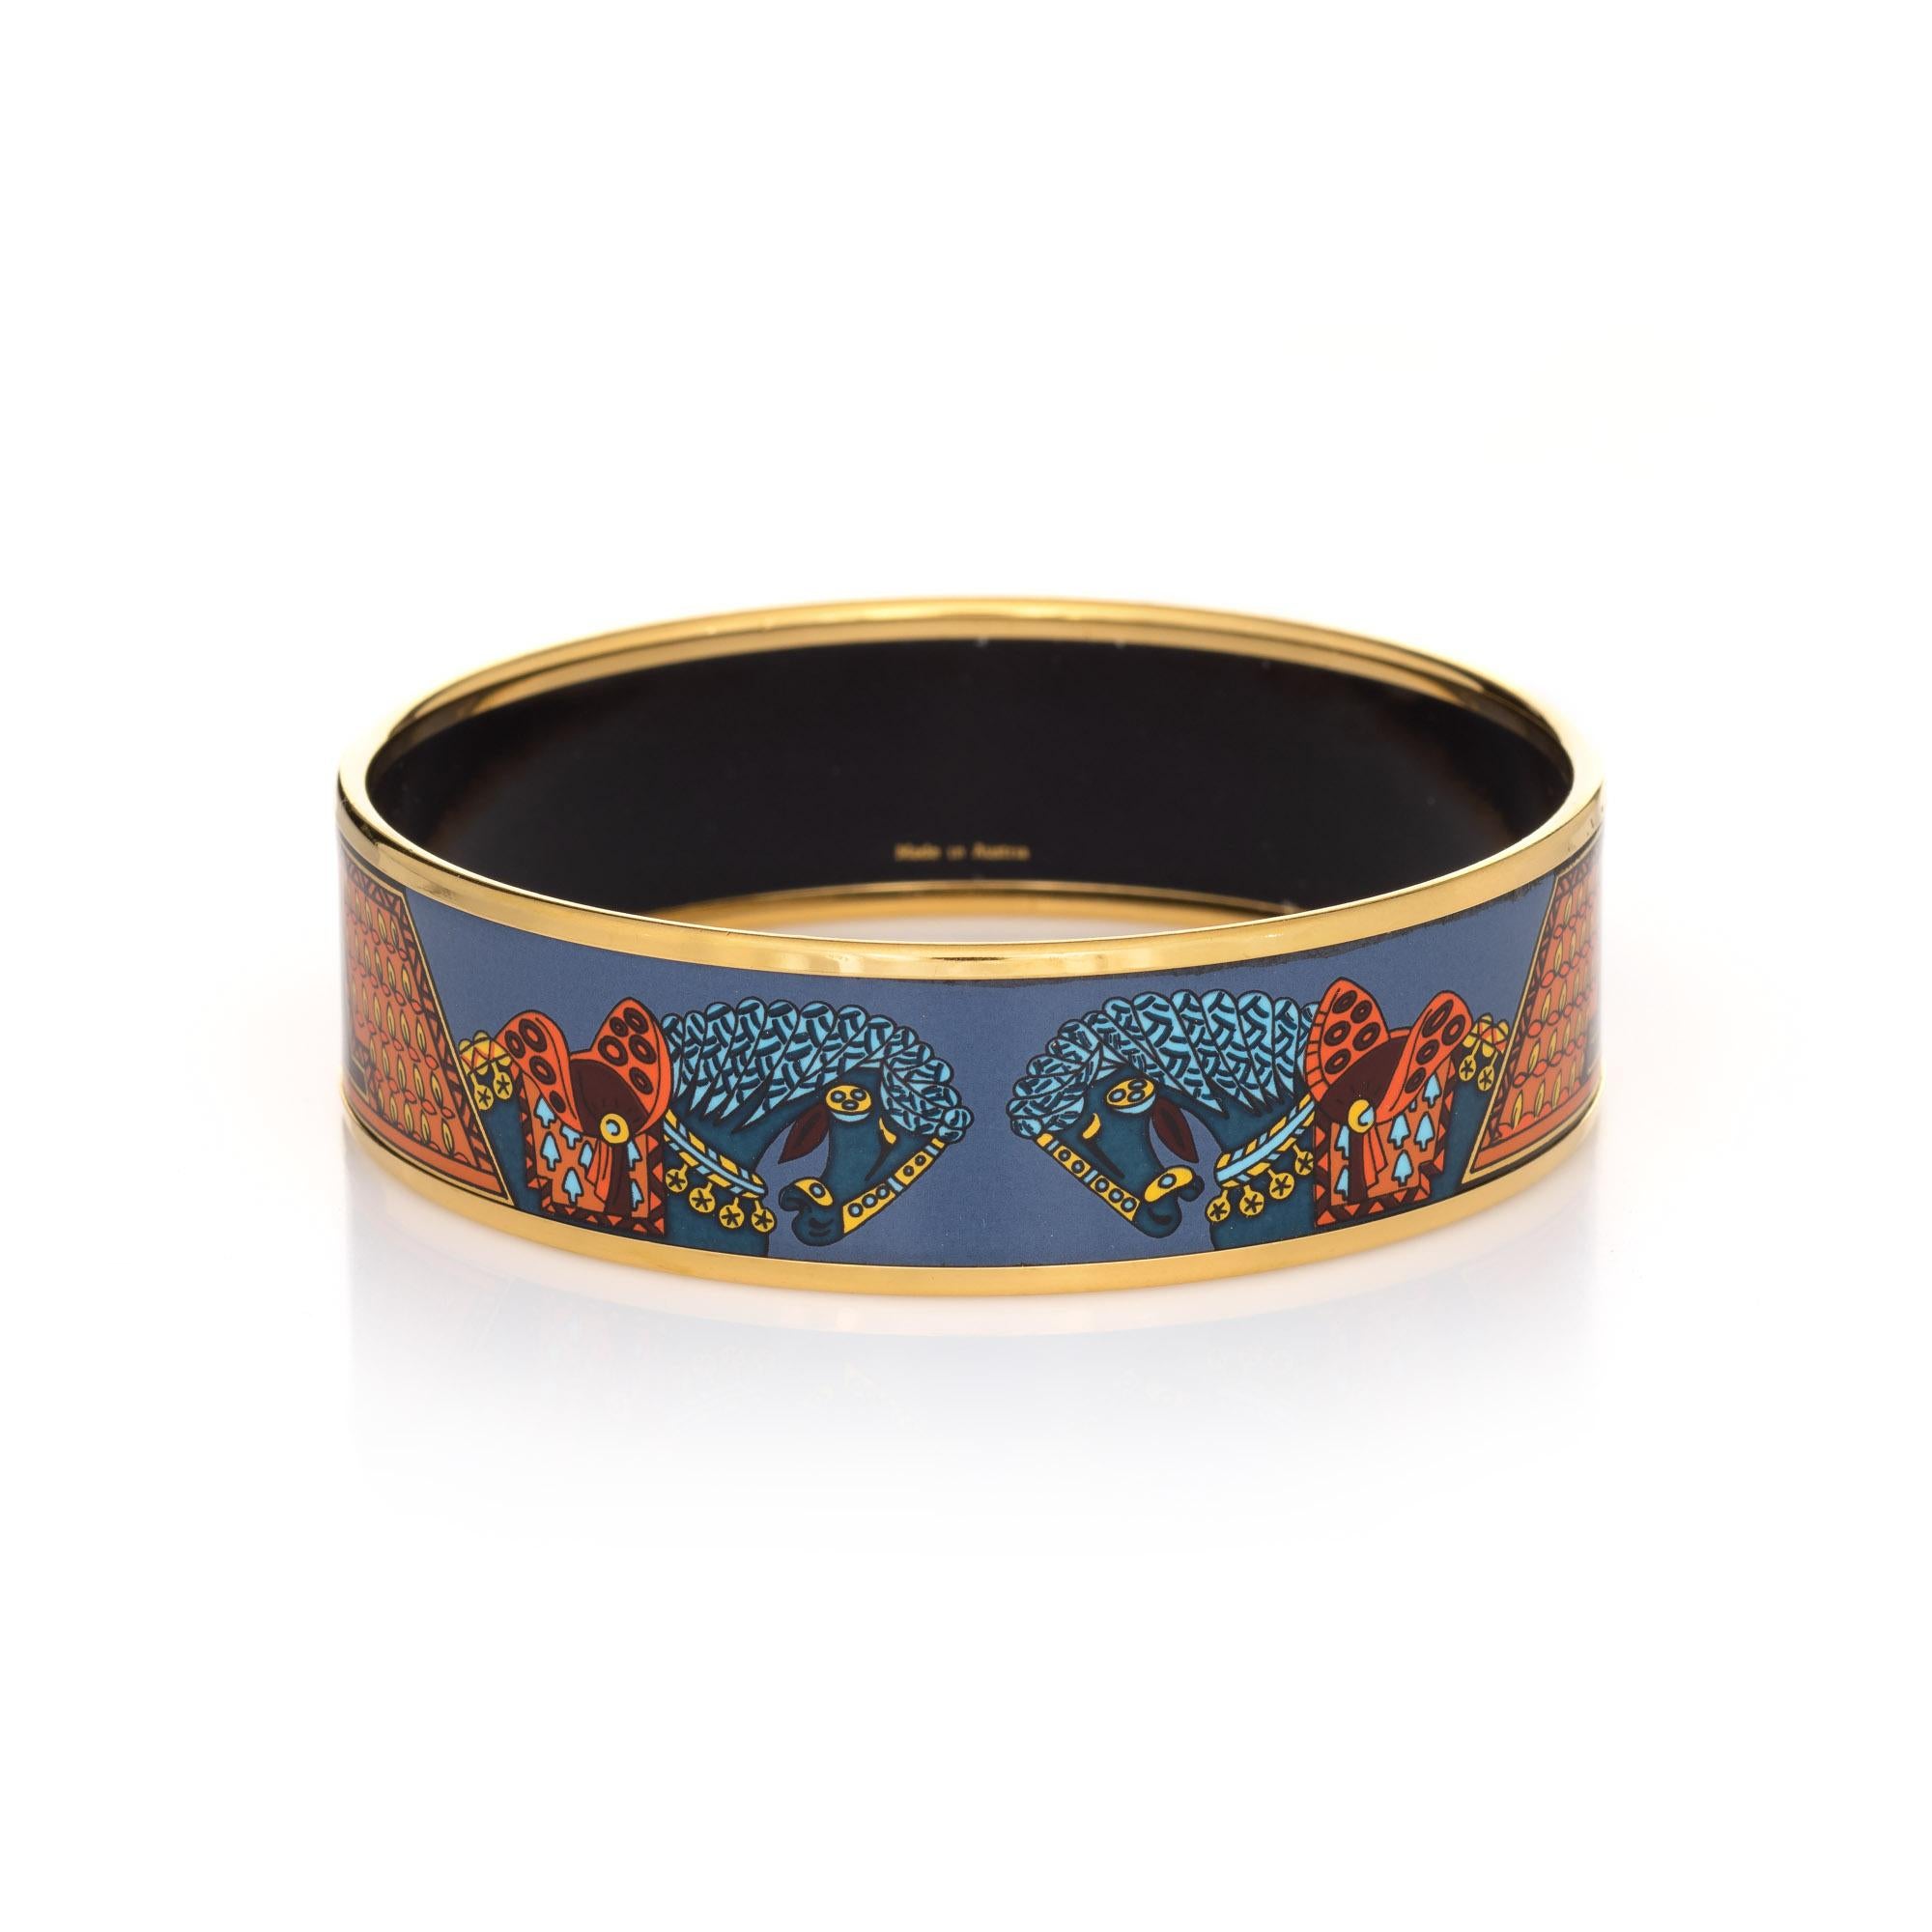 Overview:

Pre-owned vintage Hermes enamel bracelet with a blue, orange & turquoise printed equestrian design. 

The wide 0.79